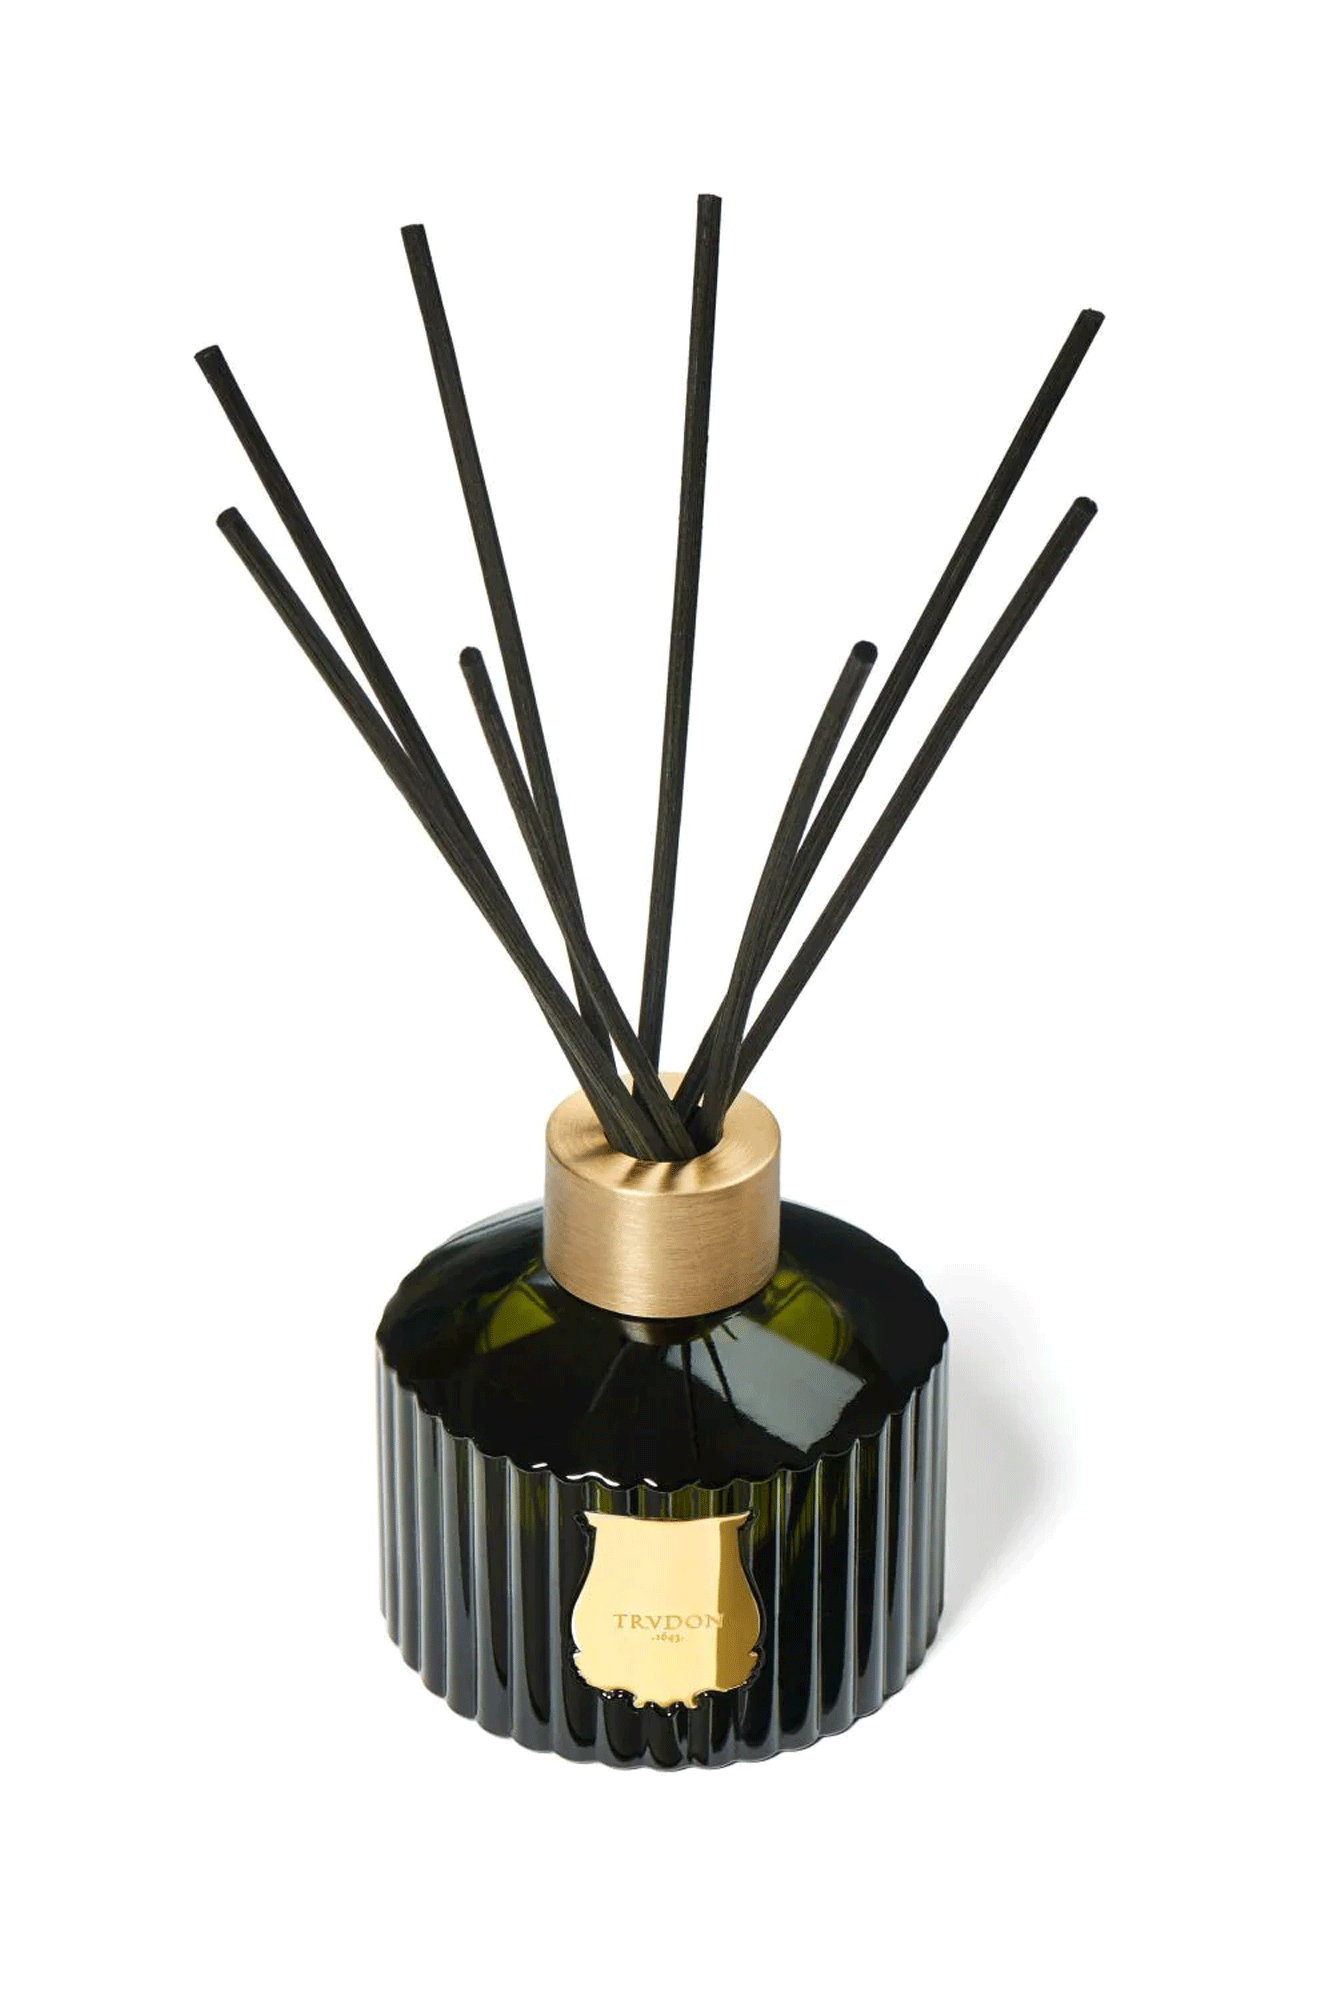 The Trudon Diffuser is handcrafted out of the same emblematic Trudon-green glass as the candles. The fluted container is adorned with a gold emblem. The Diffuser is topped with a 100% recyclable aluminum ring. Through it, you place 8 natural, black rattan sticks.